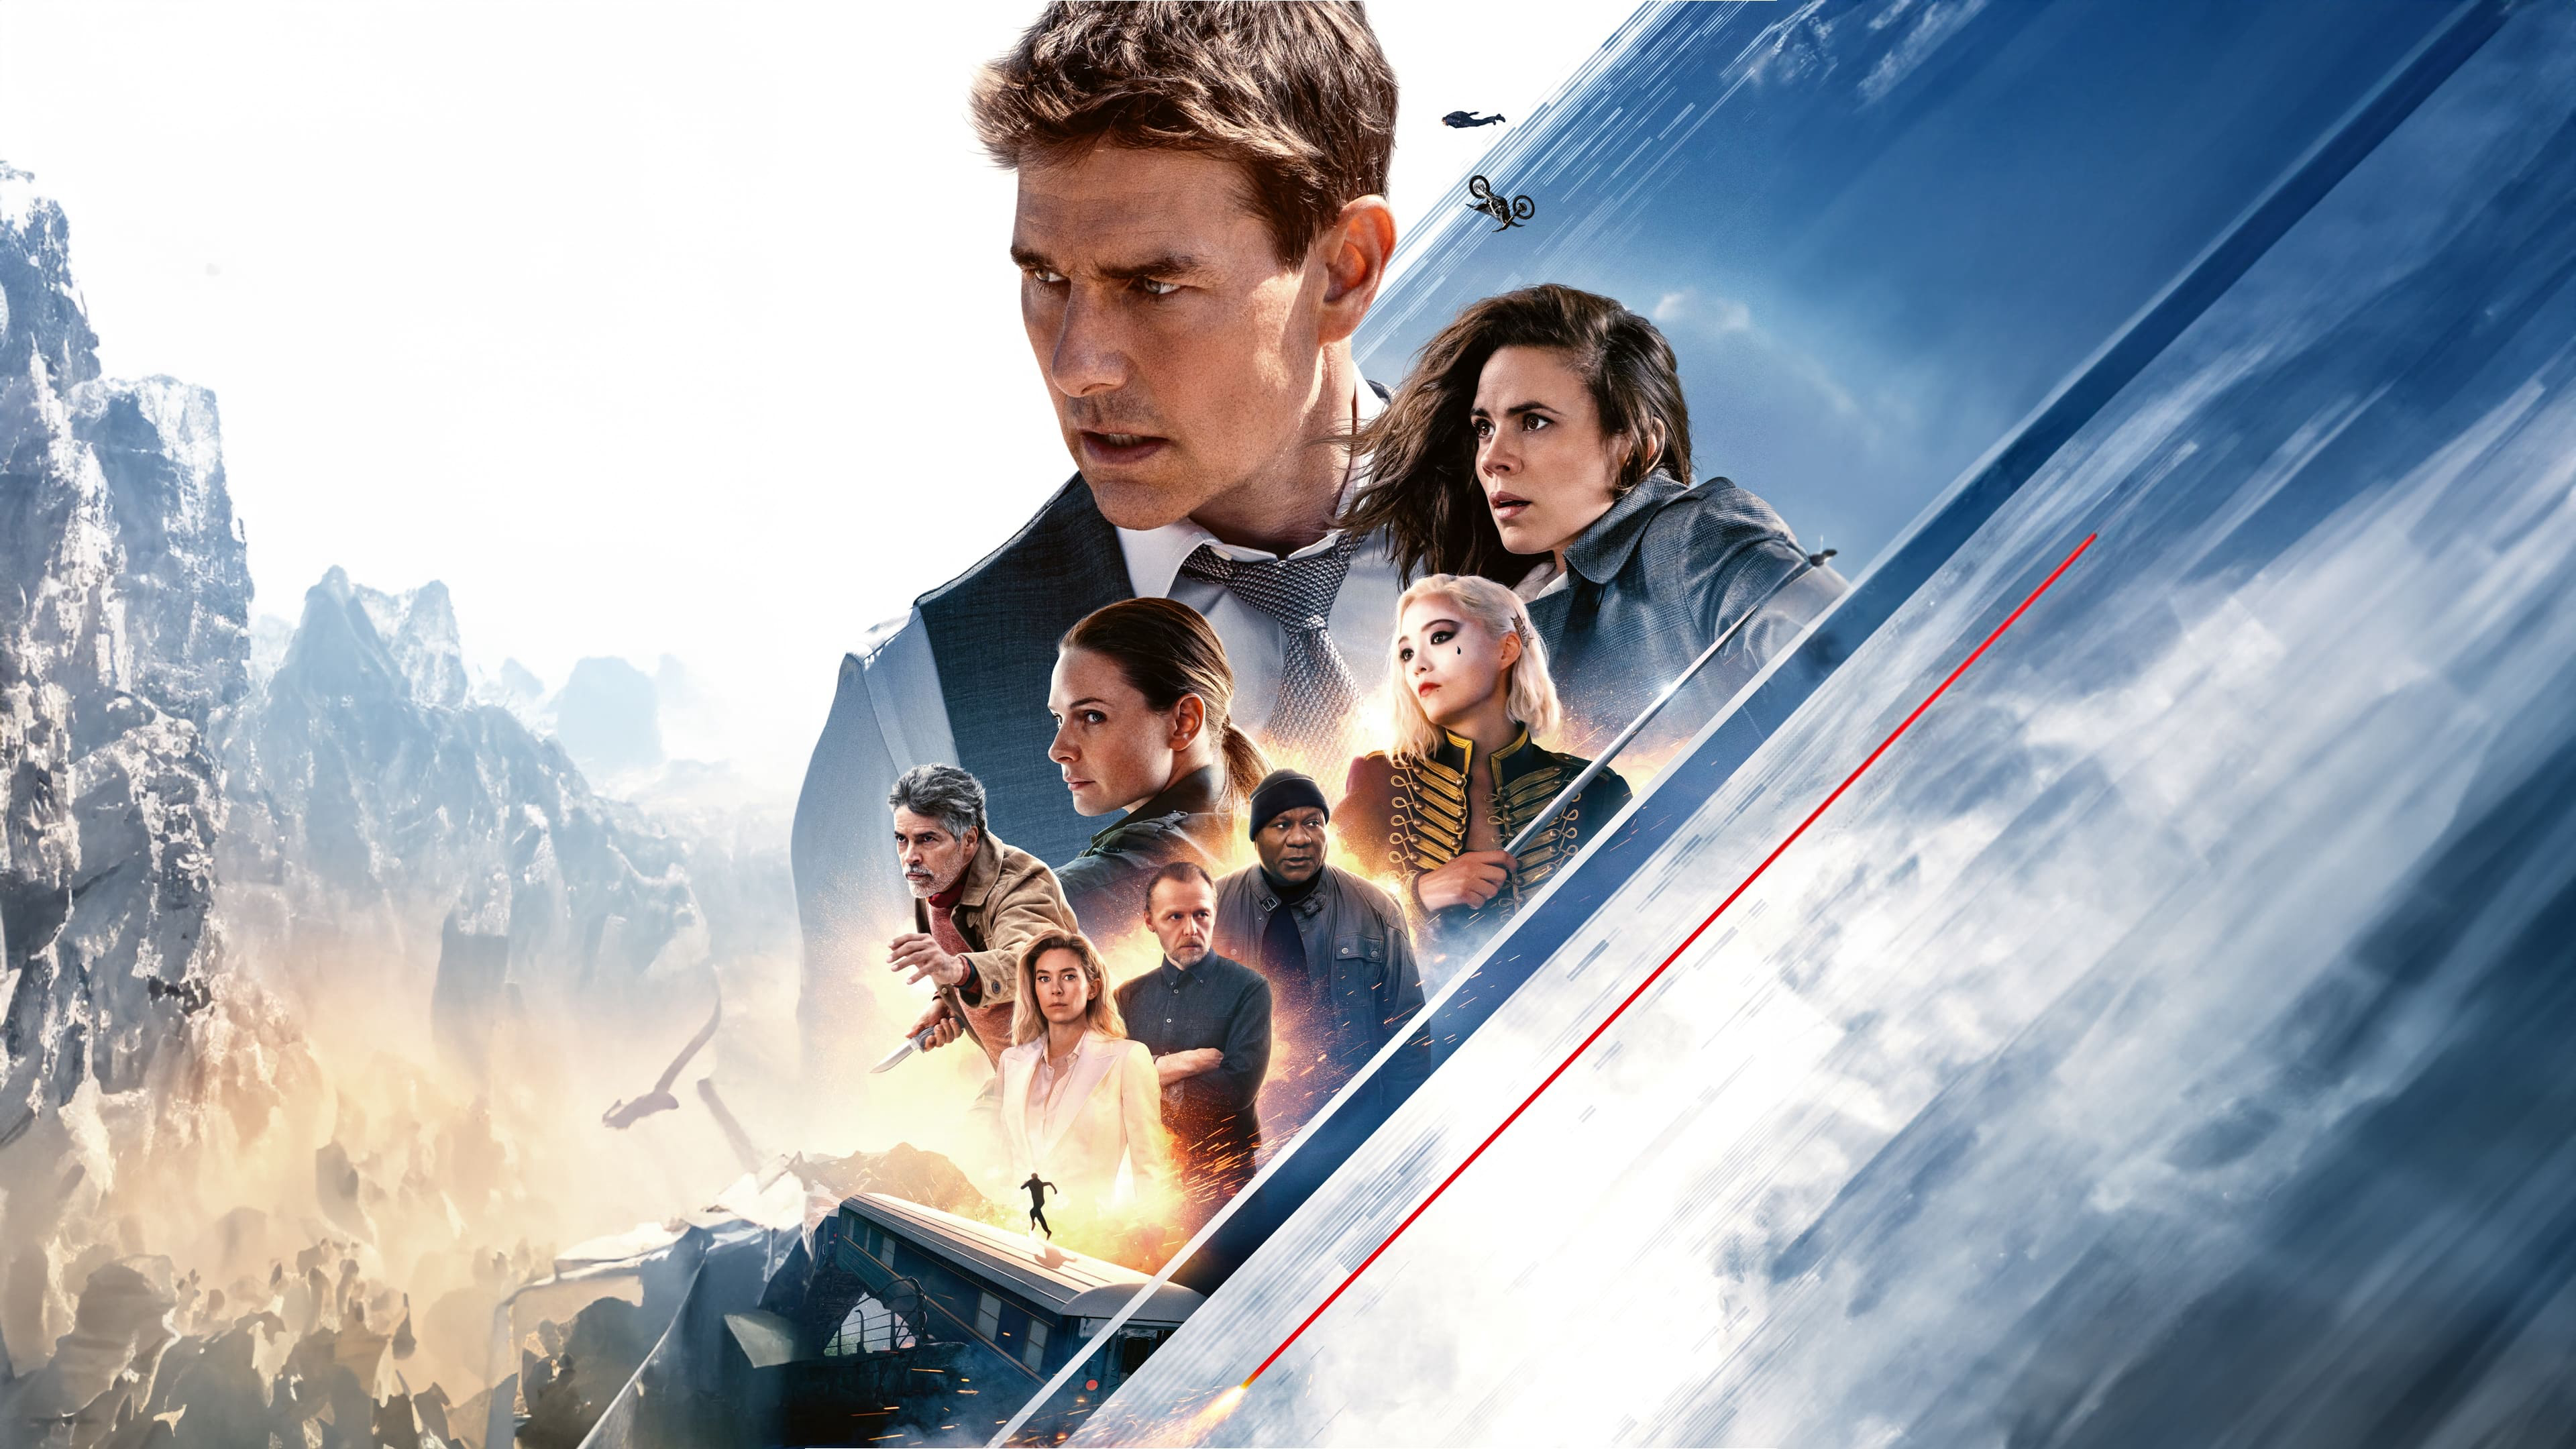 Banner Phim Nhiệm Vụ Bất Khả Thi 7 - Nghiệp Báo Phần 1 (Mission: Impossible - Dead Reckoning Part One)